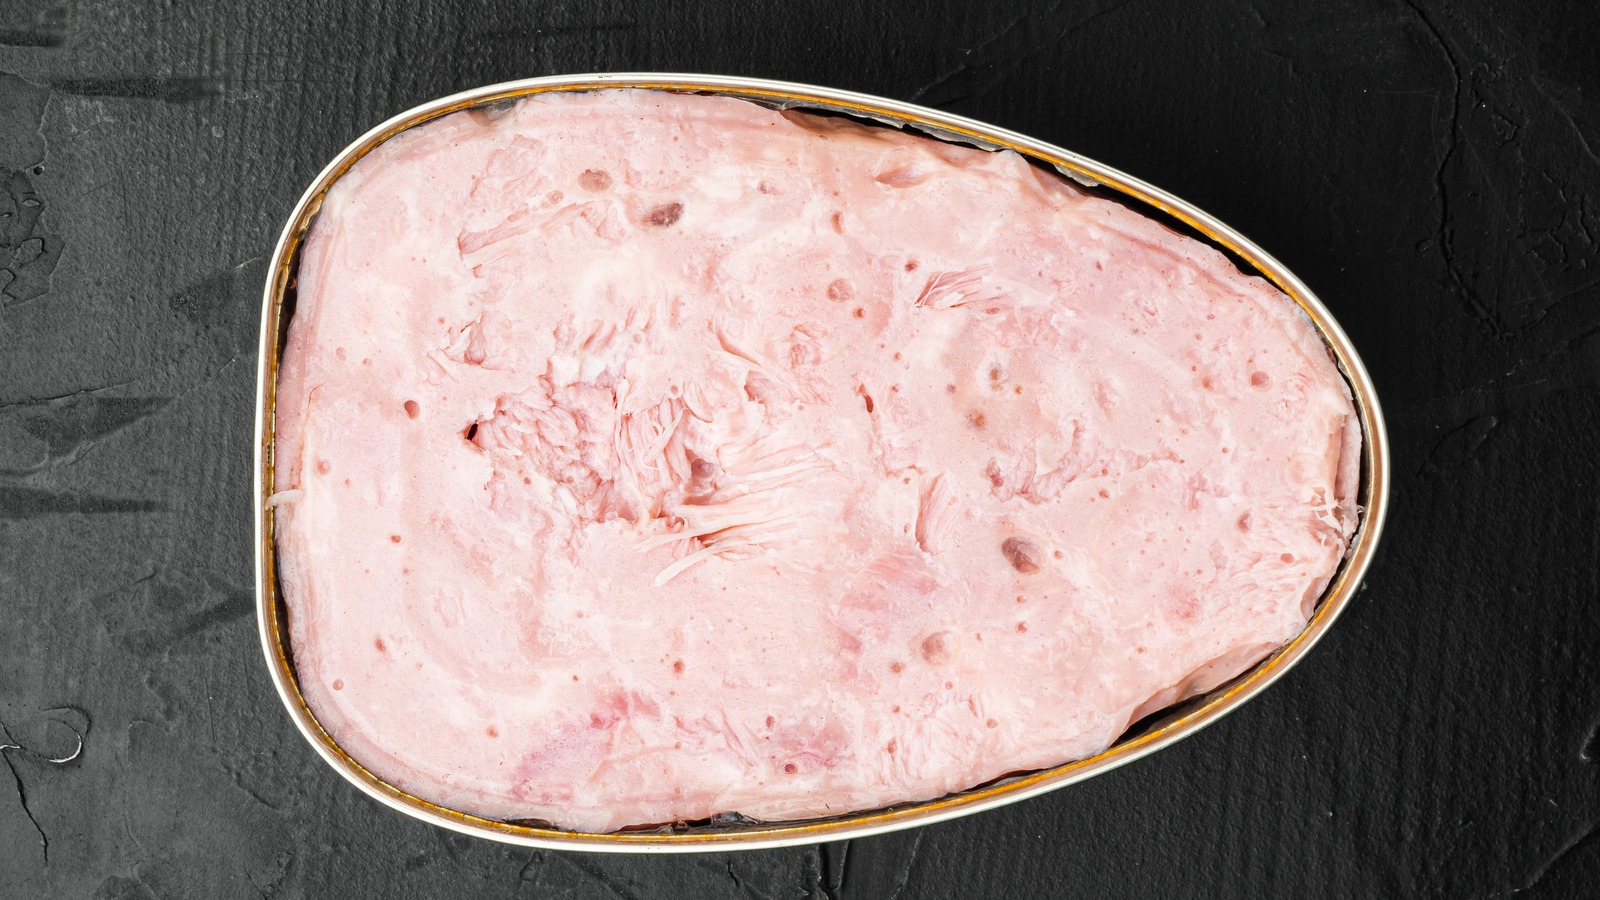 Canned Ham Brands Ranked From Worst To Best